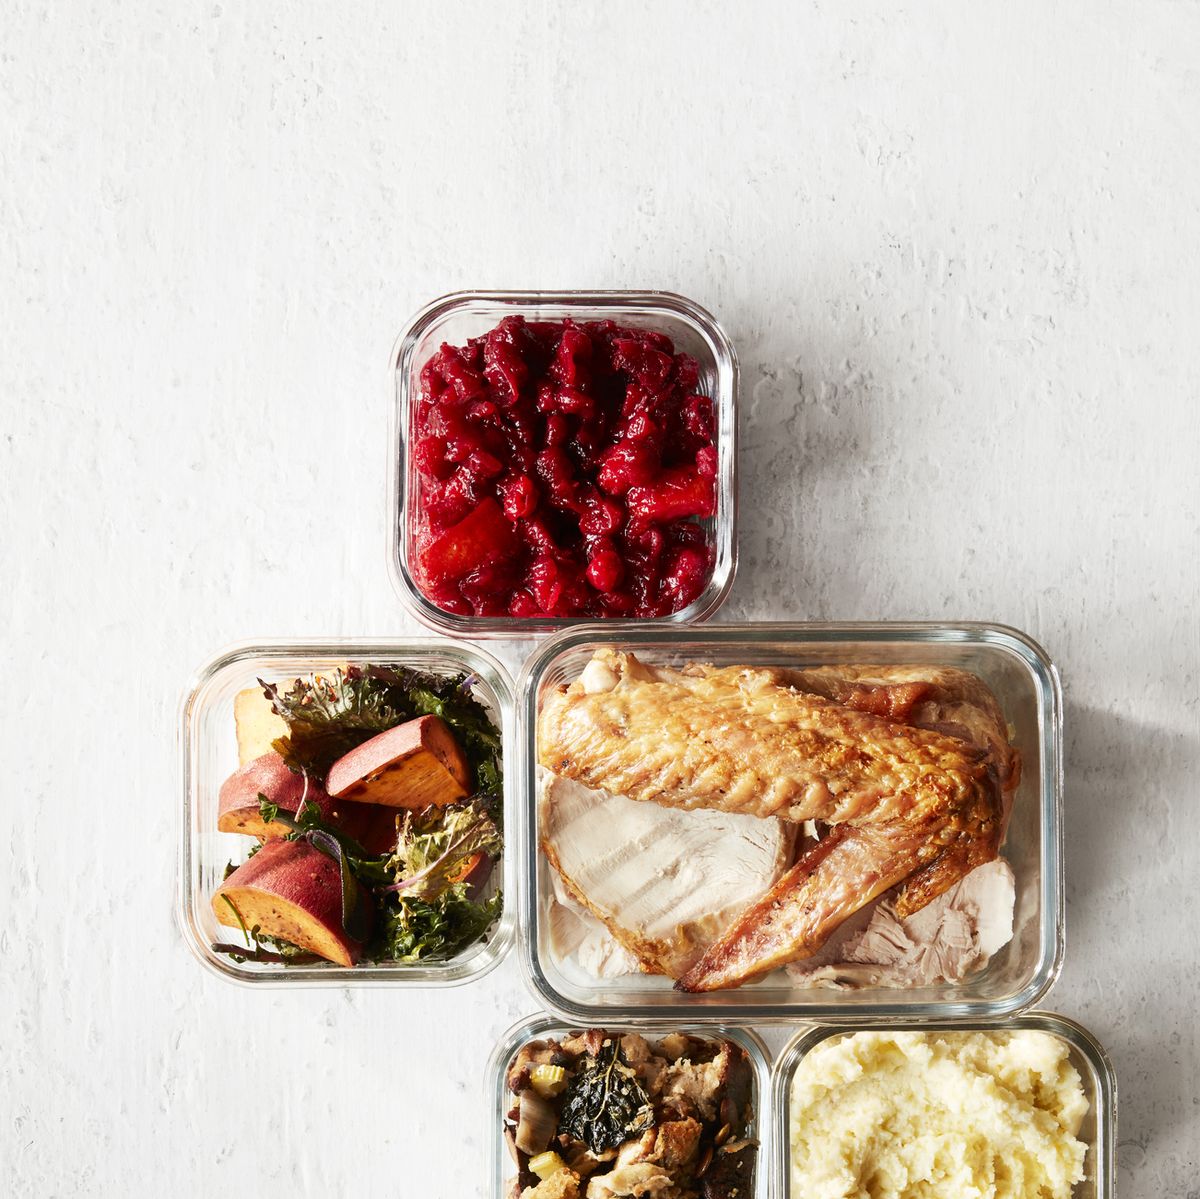 cranberry sauce, stuffing, mashed potatoes, turkey, greens and yams in leftover containers overhead